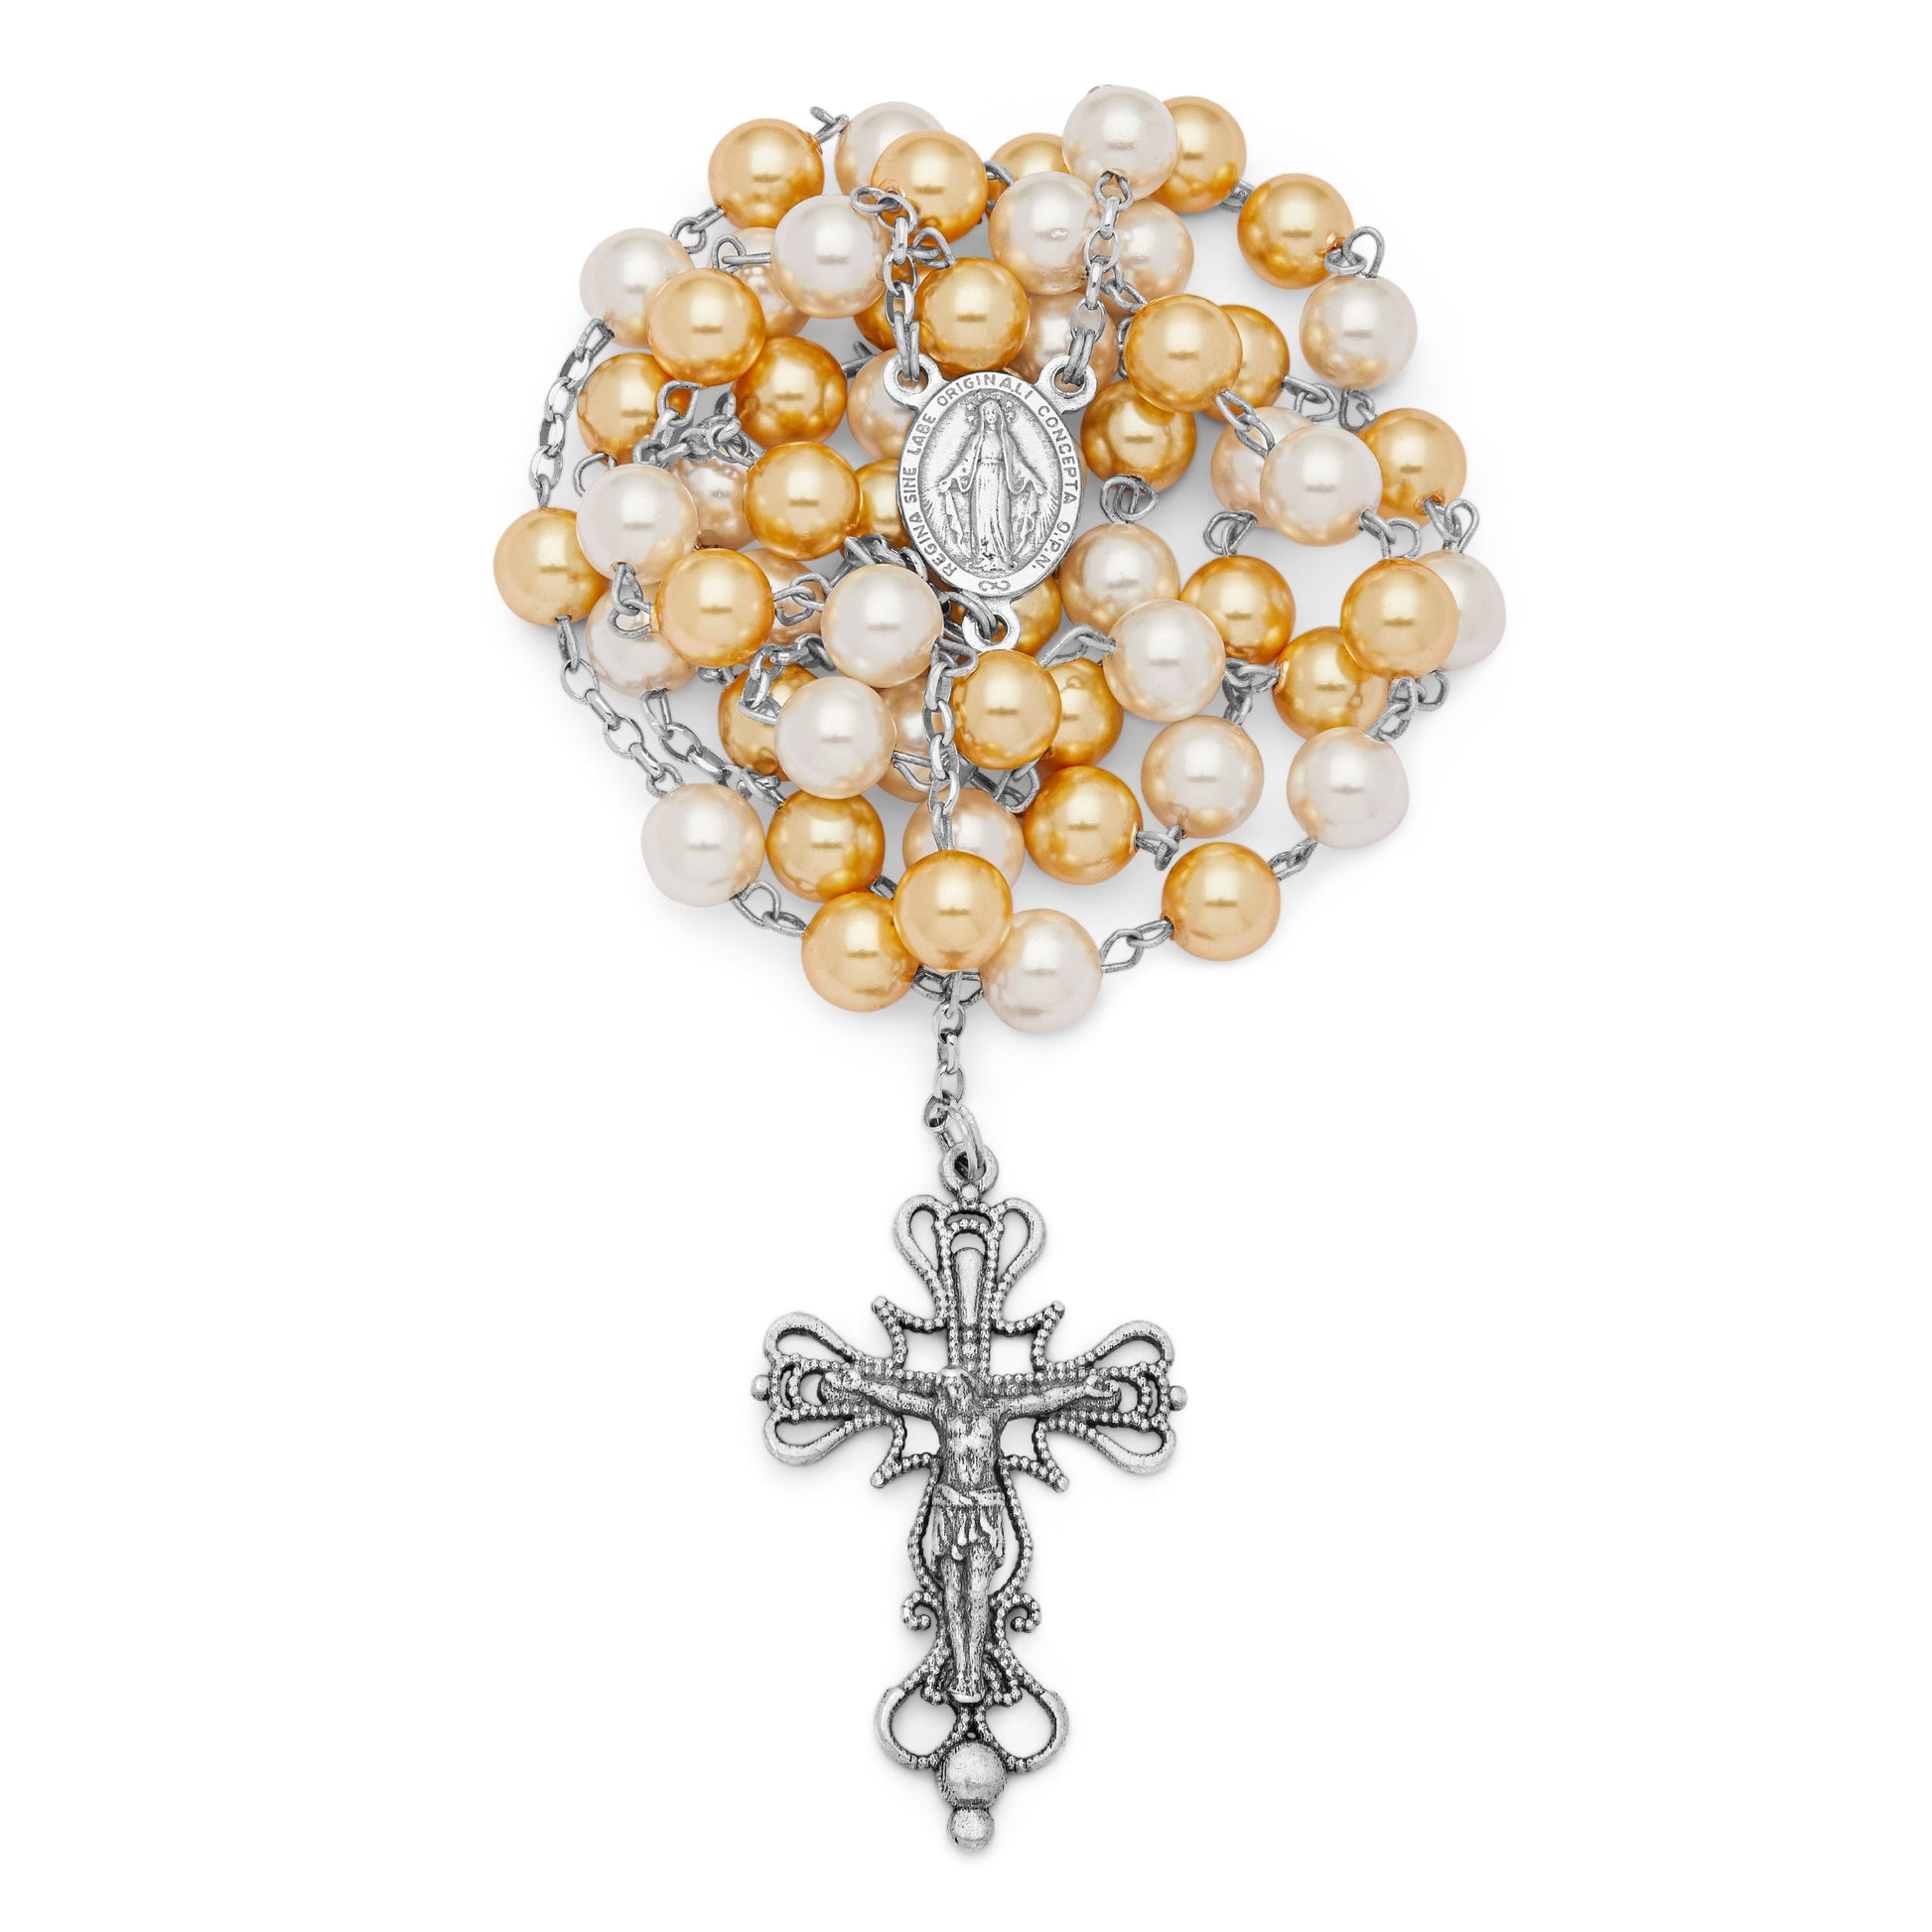 MONDO CATTOLICO Prayer Beads Sterling Silver Rosary Swarovski Crystal Pearls White and Gold Beads